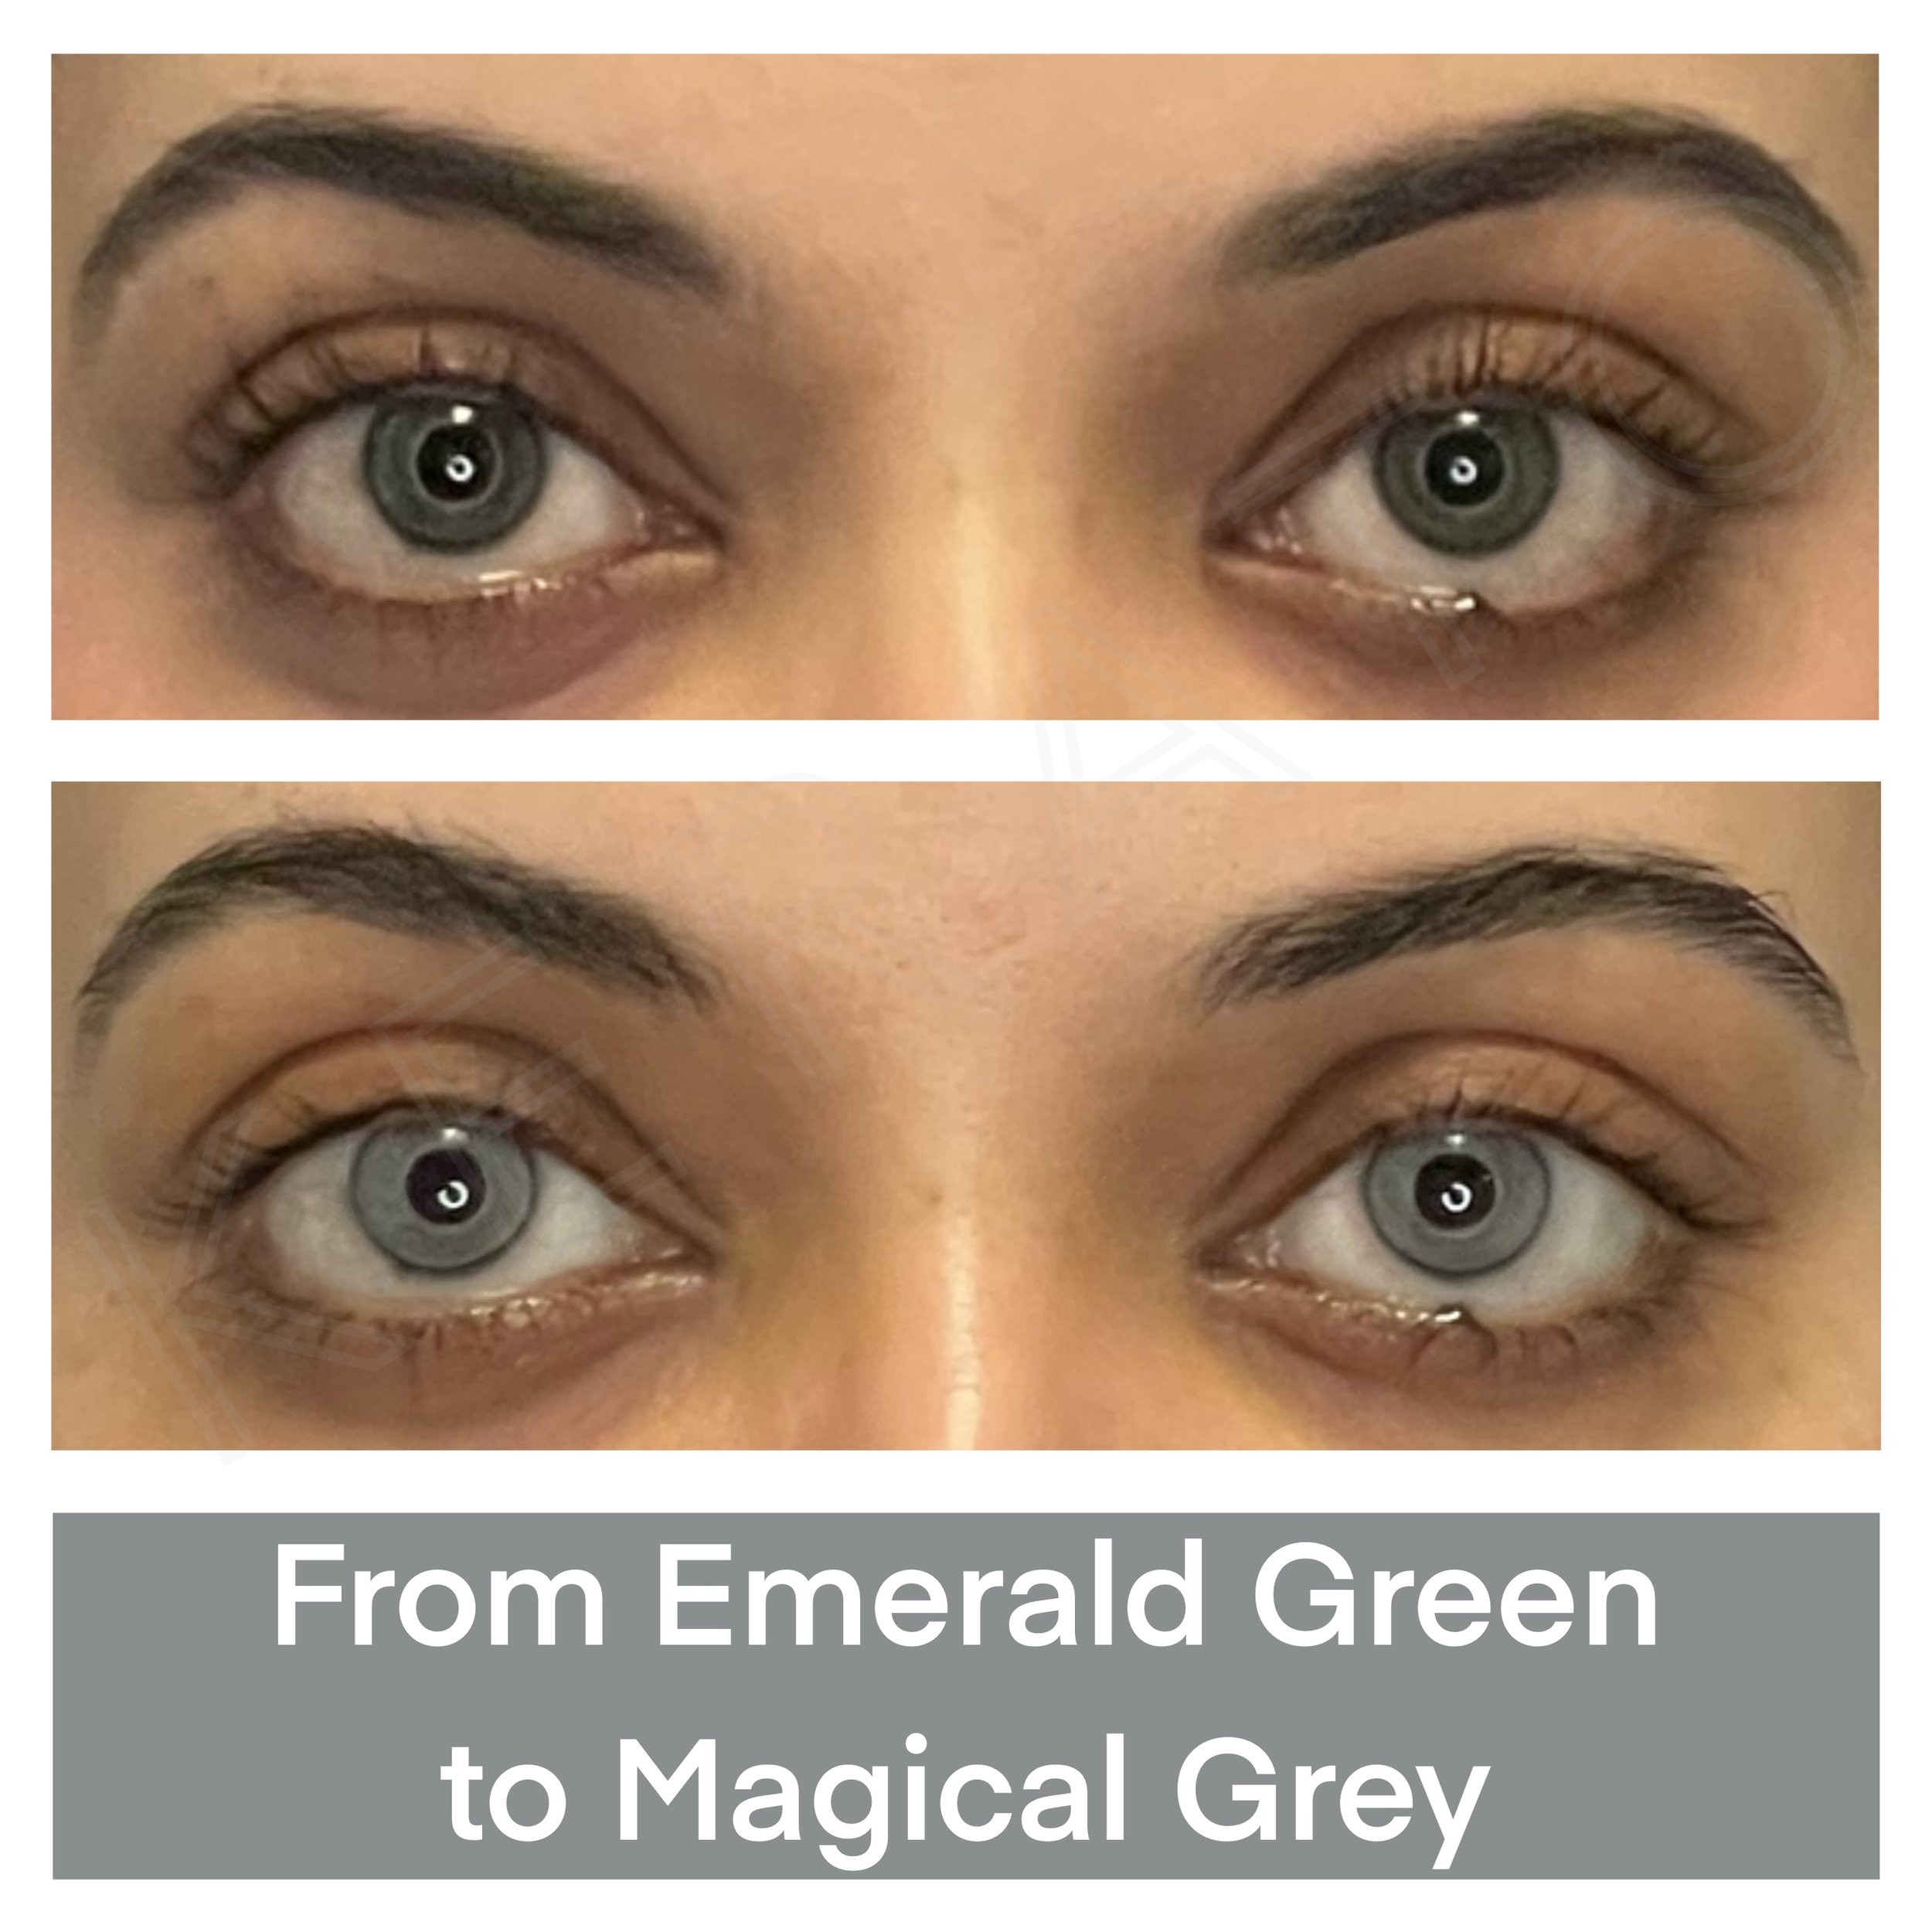 Color correction after the initial keratopigmentation with green color